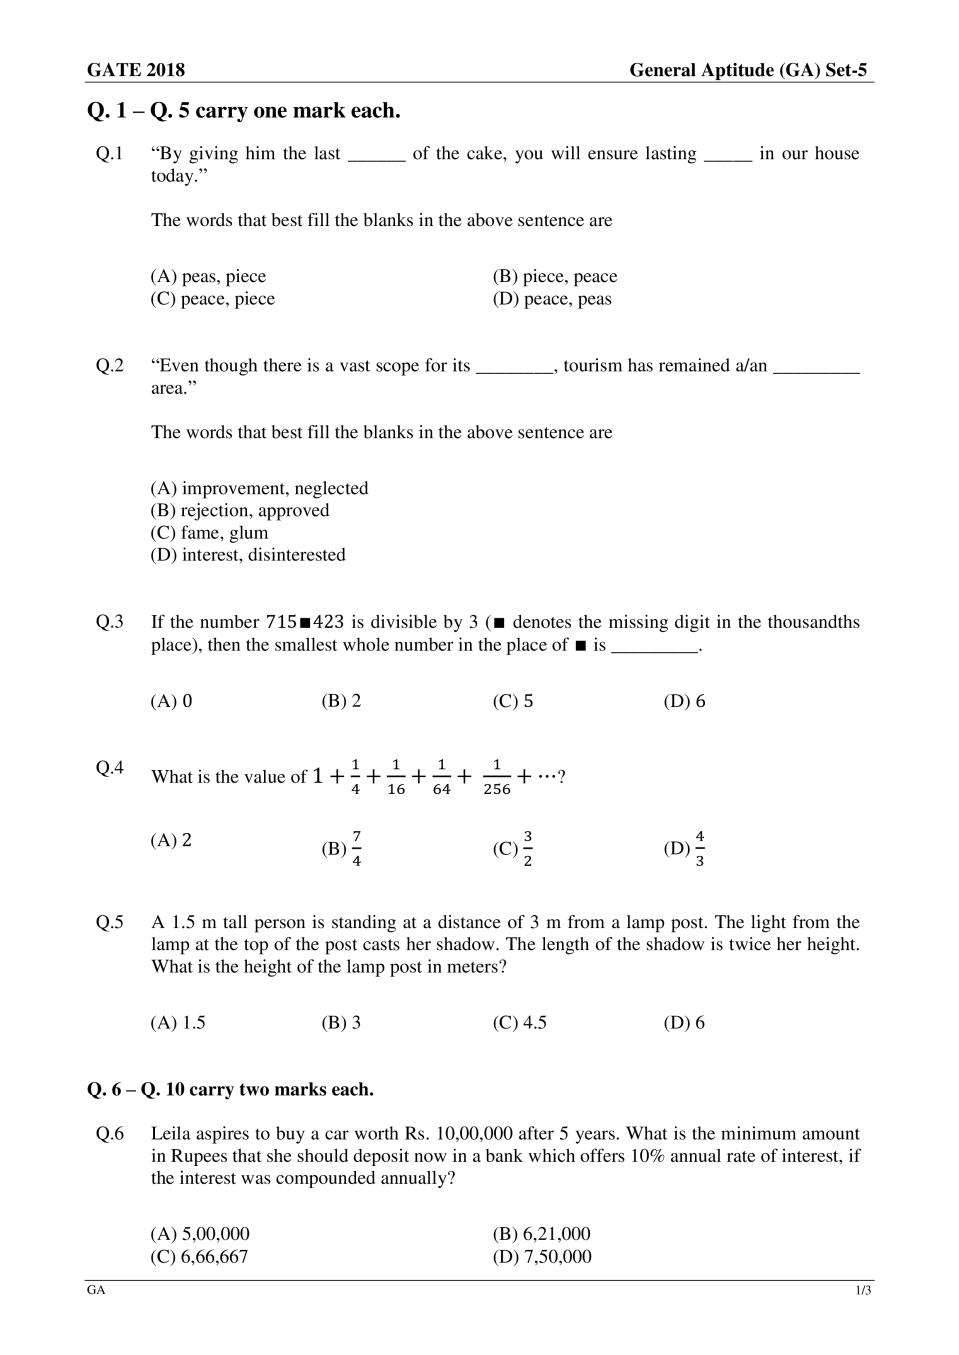 GATE 2018 Electronics and Communication Engineering (EC) Question Paper with Answer - Page 1